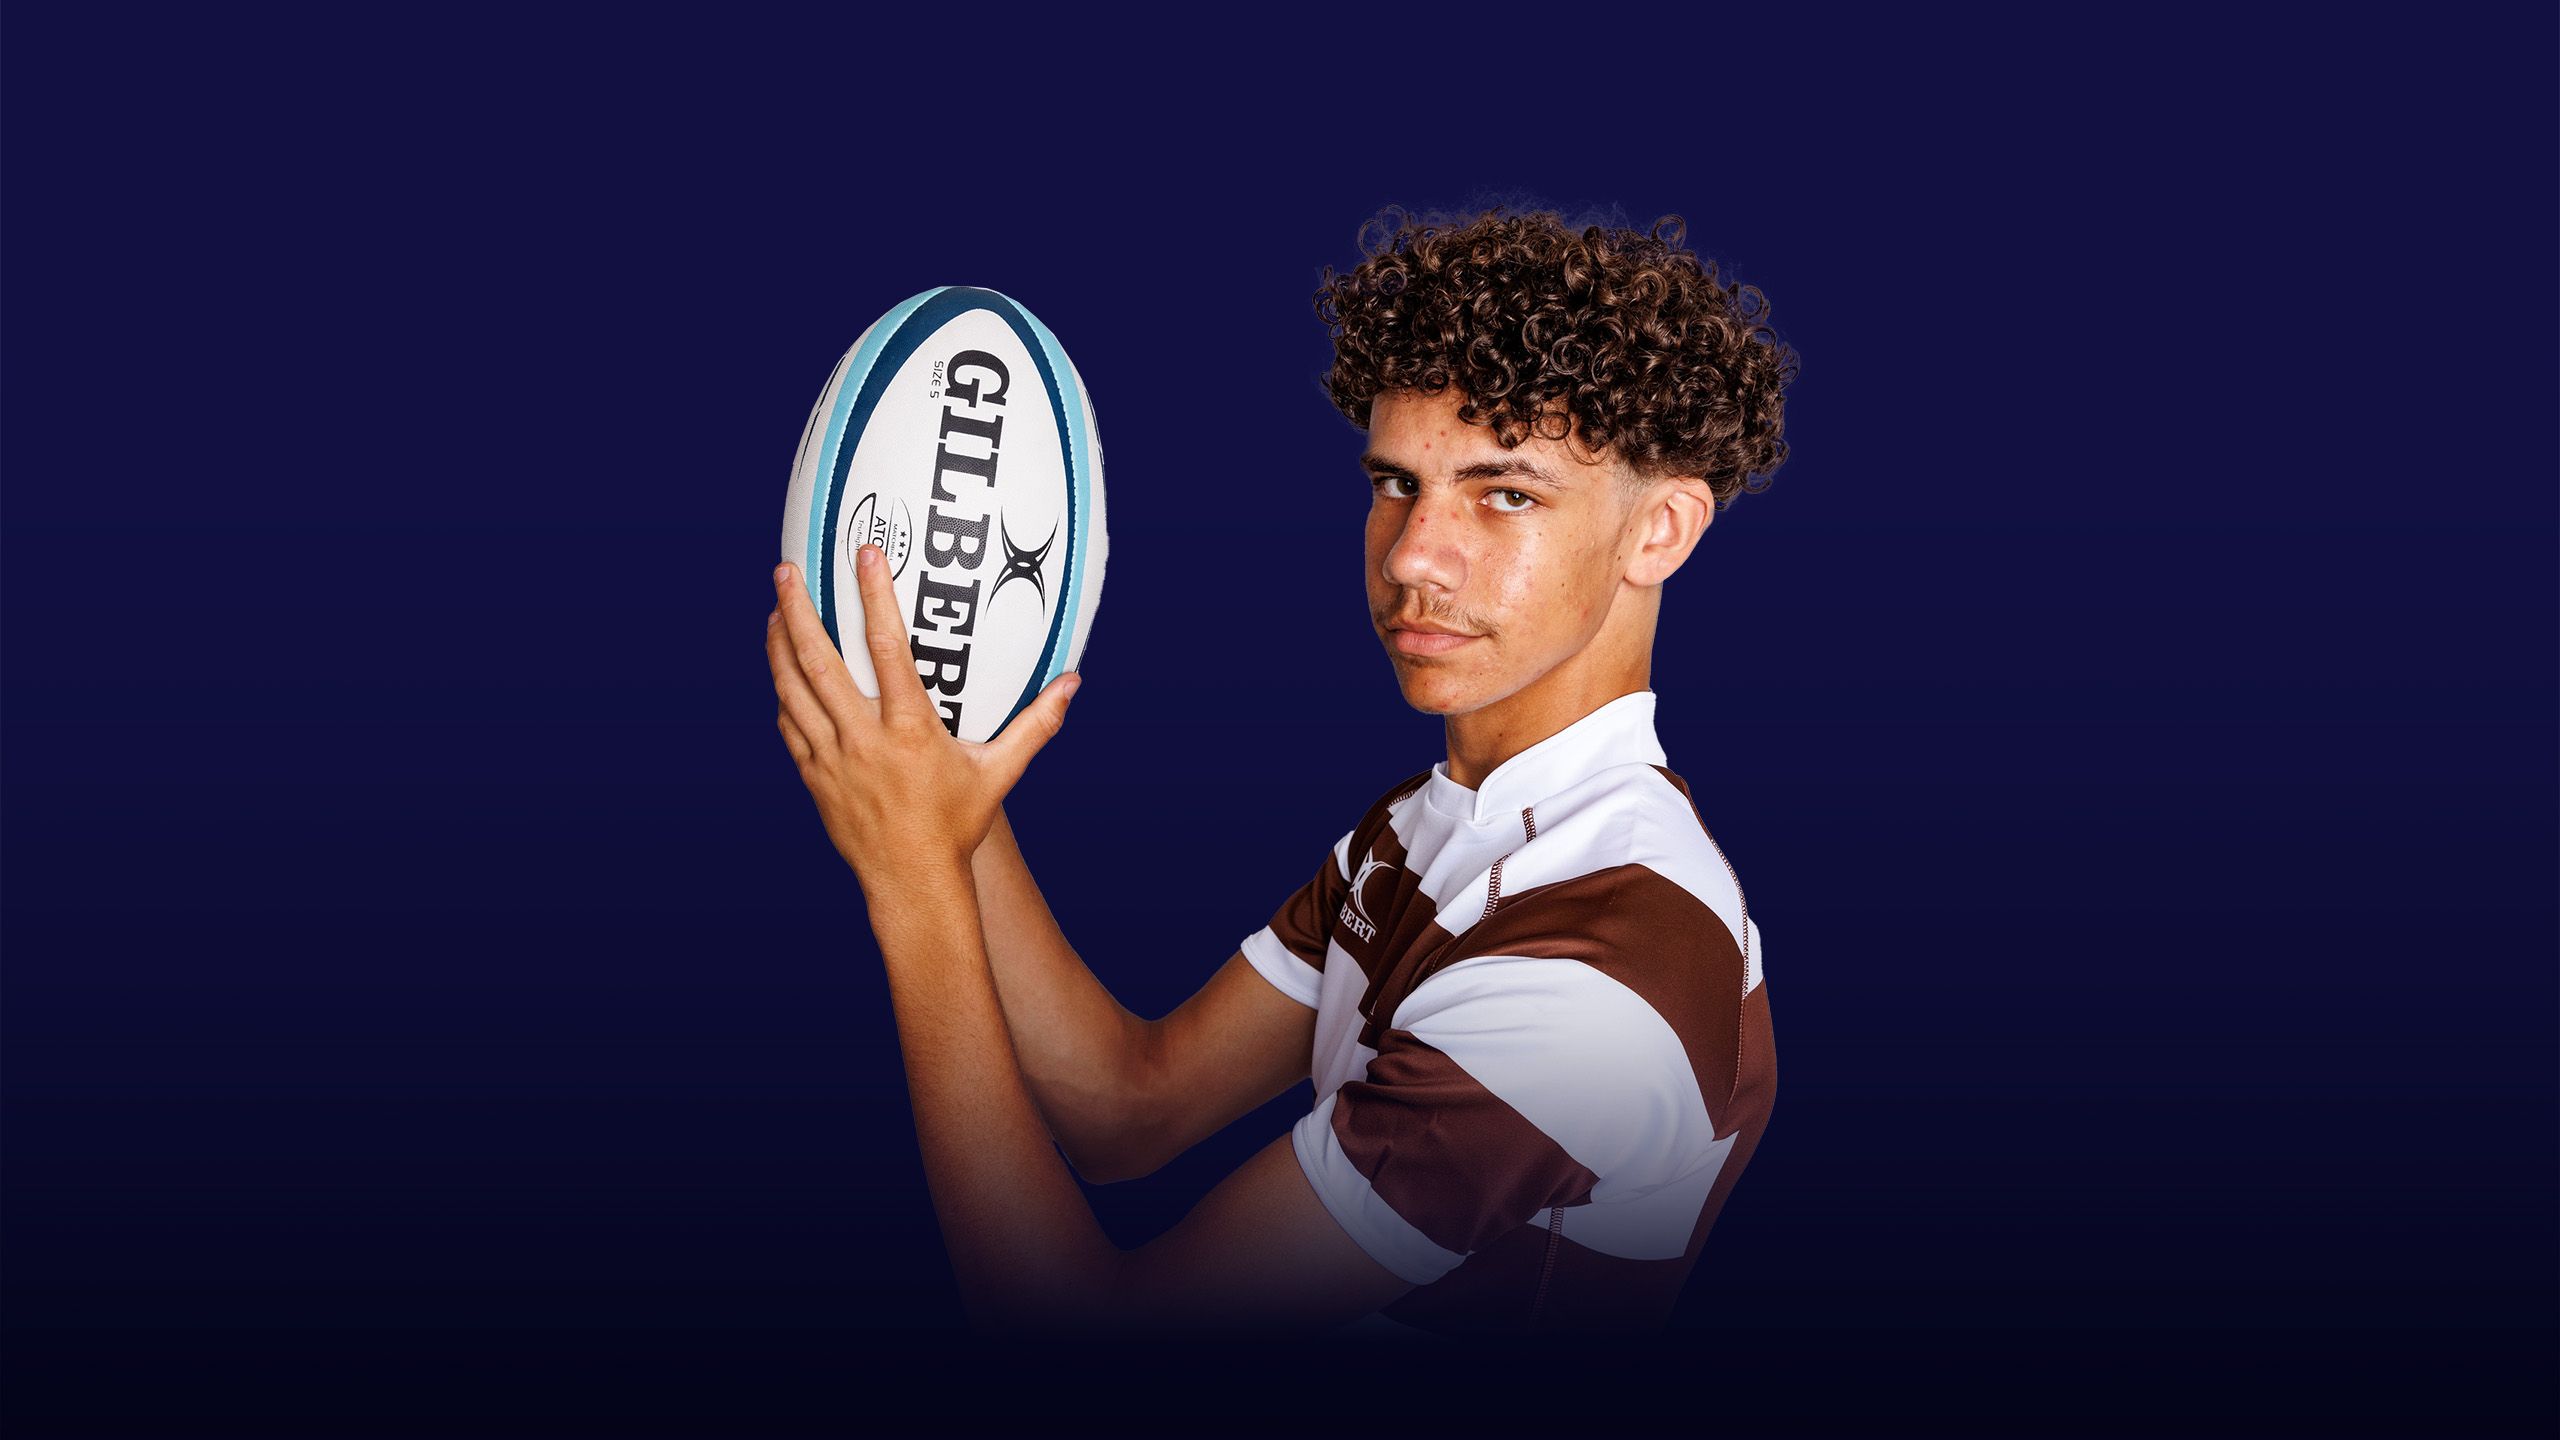 Image of a boy holding up a rugby ball with an overlay of the text "instilling values"